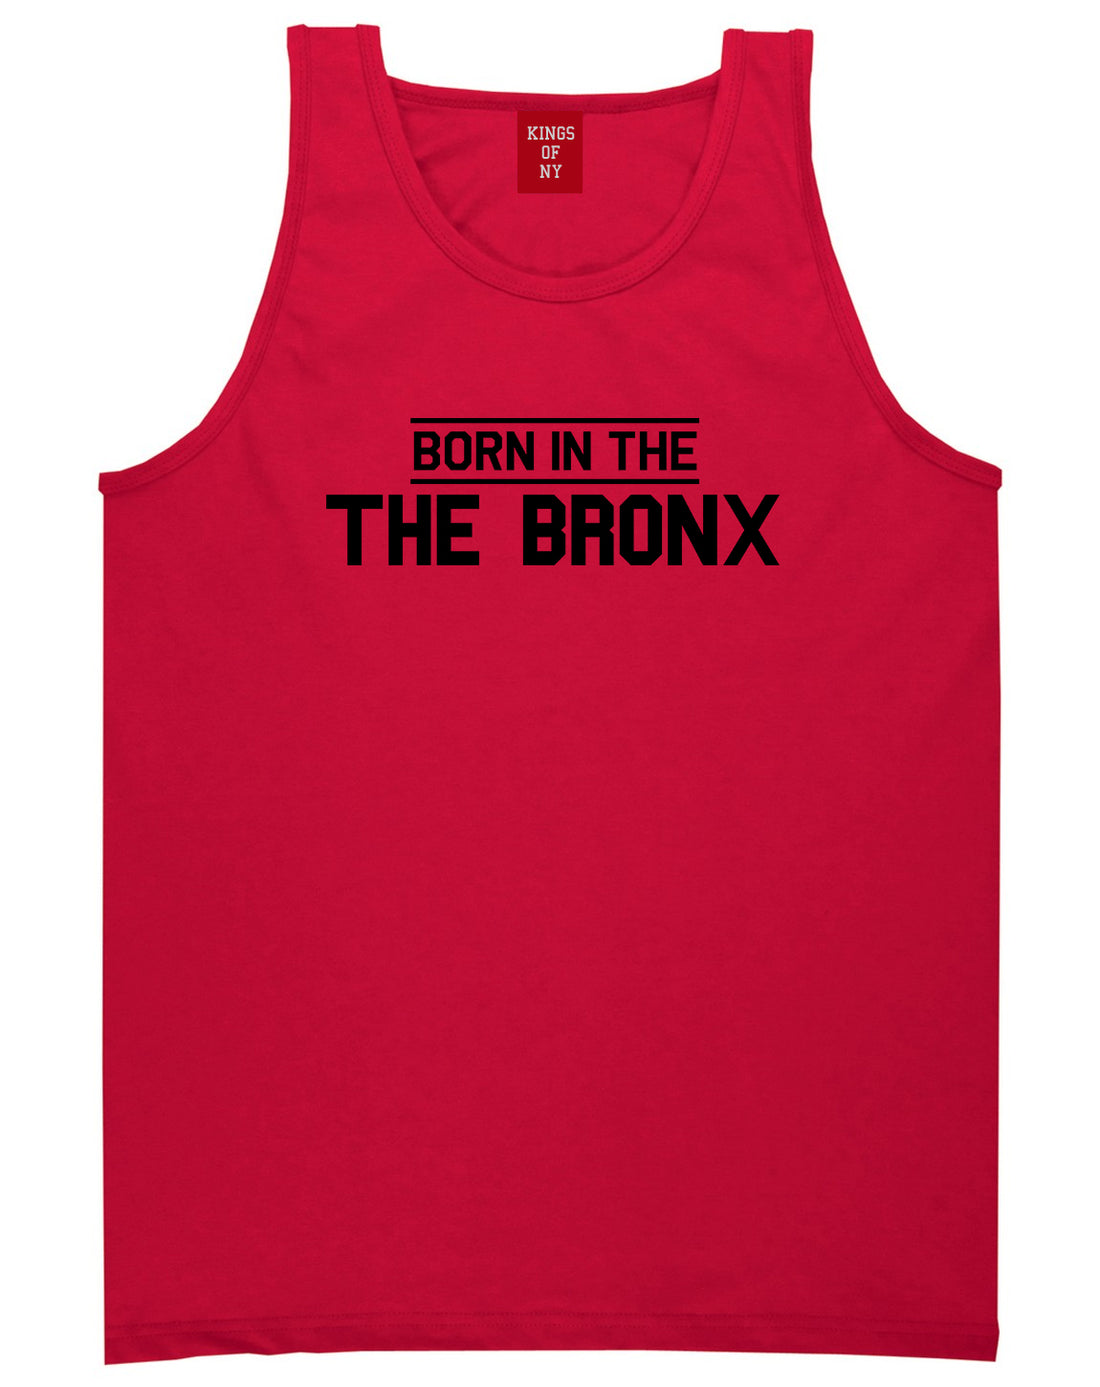 Born In The Bronx NY Mens Tank Top T-Shirt Red